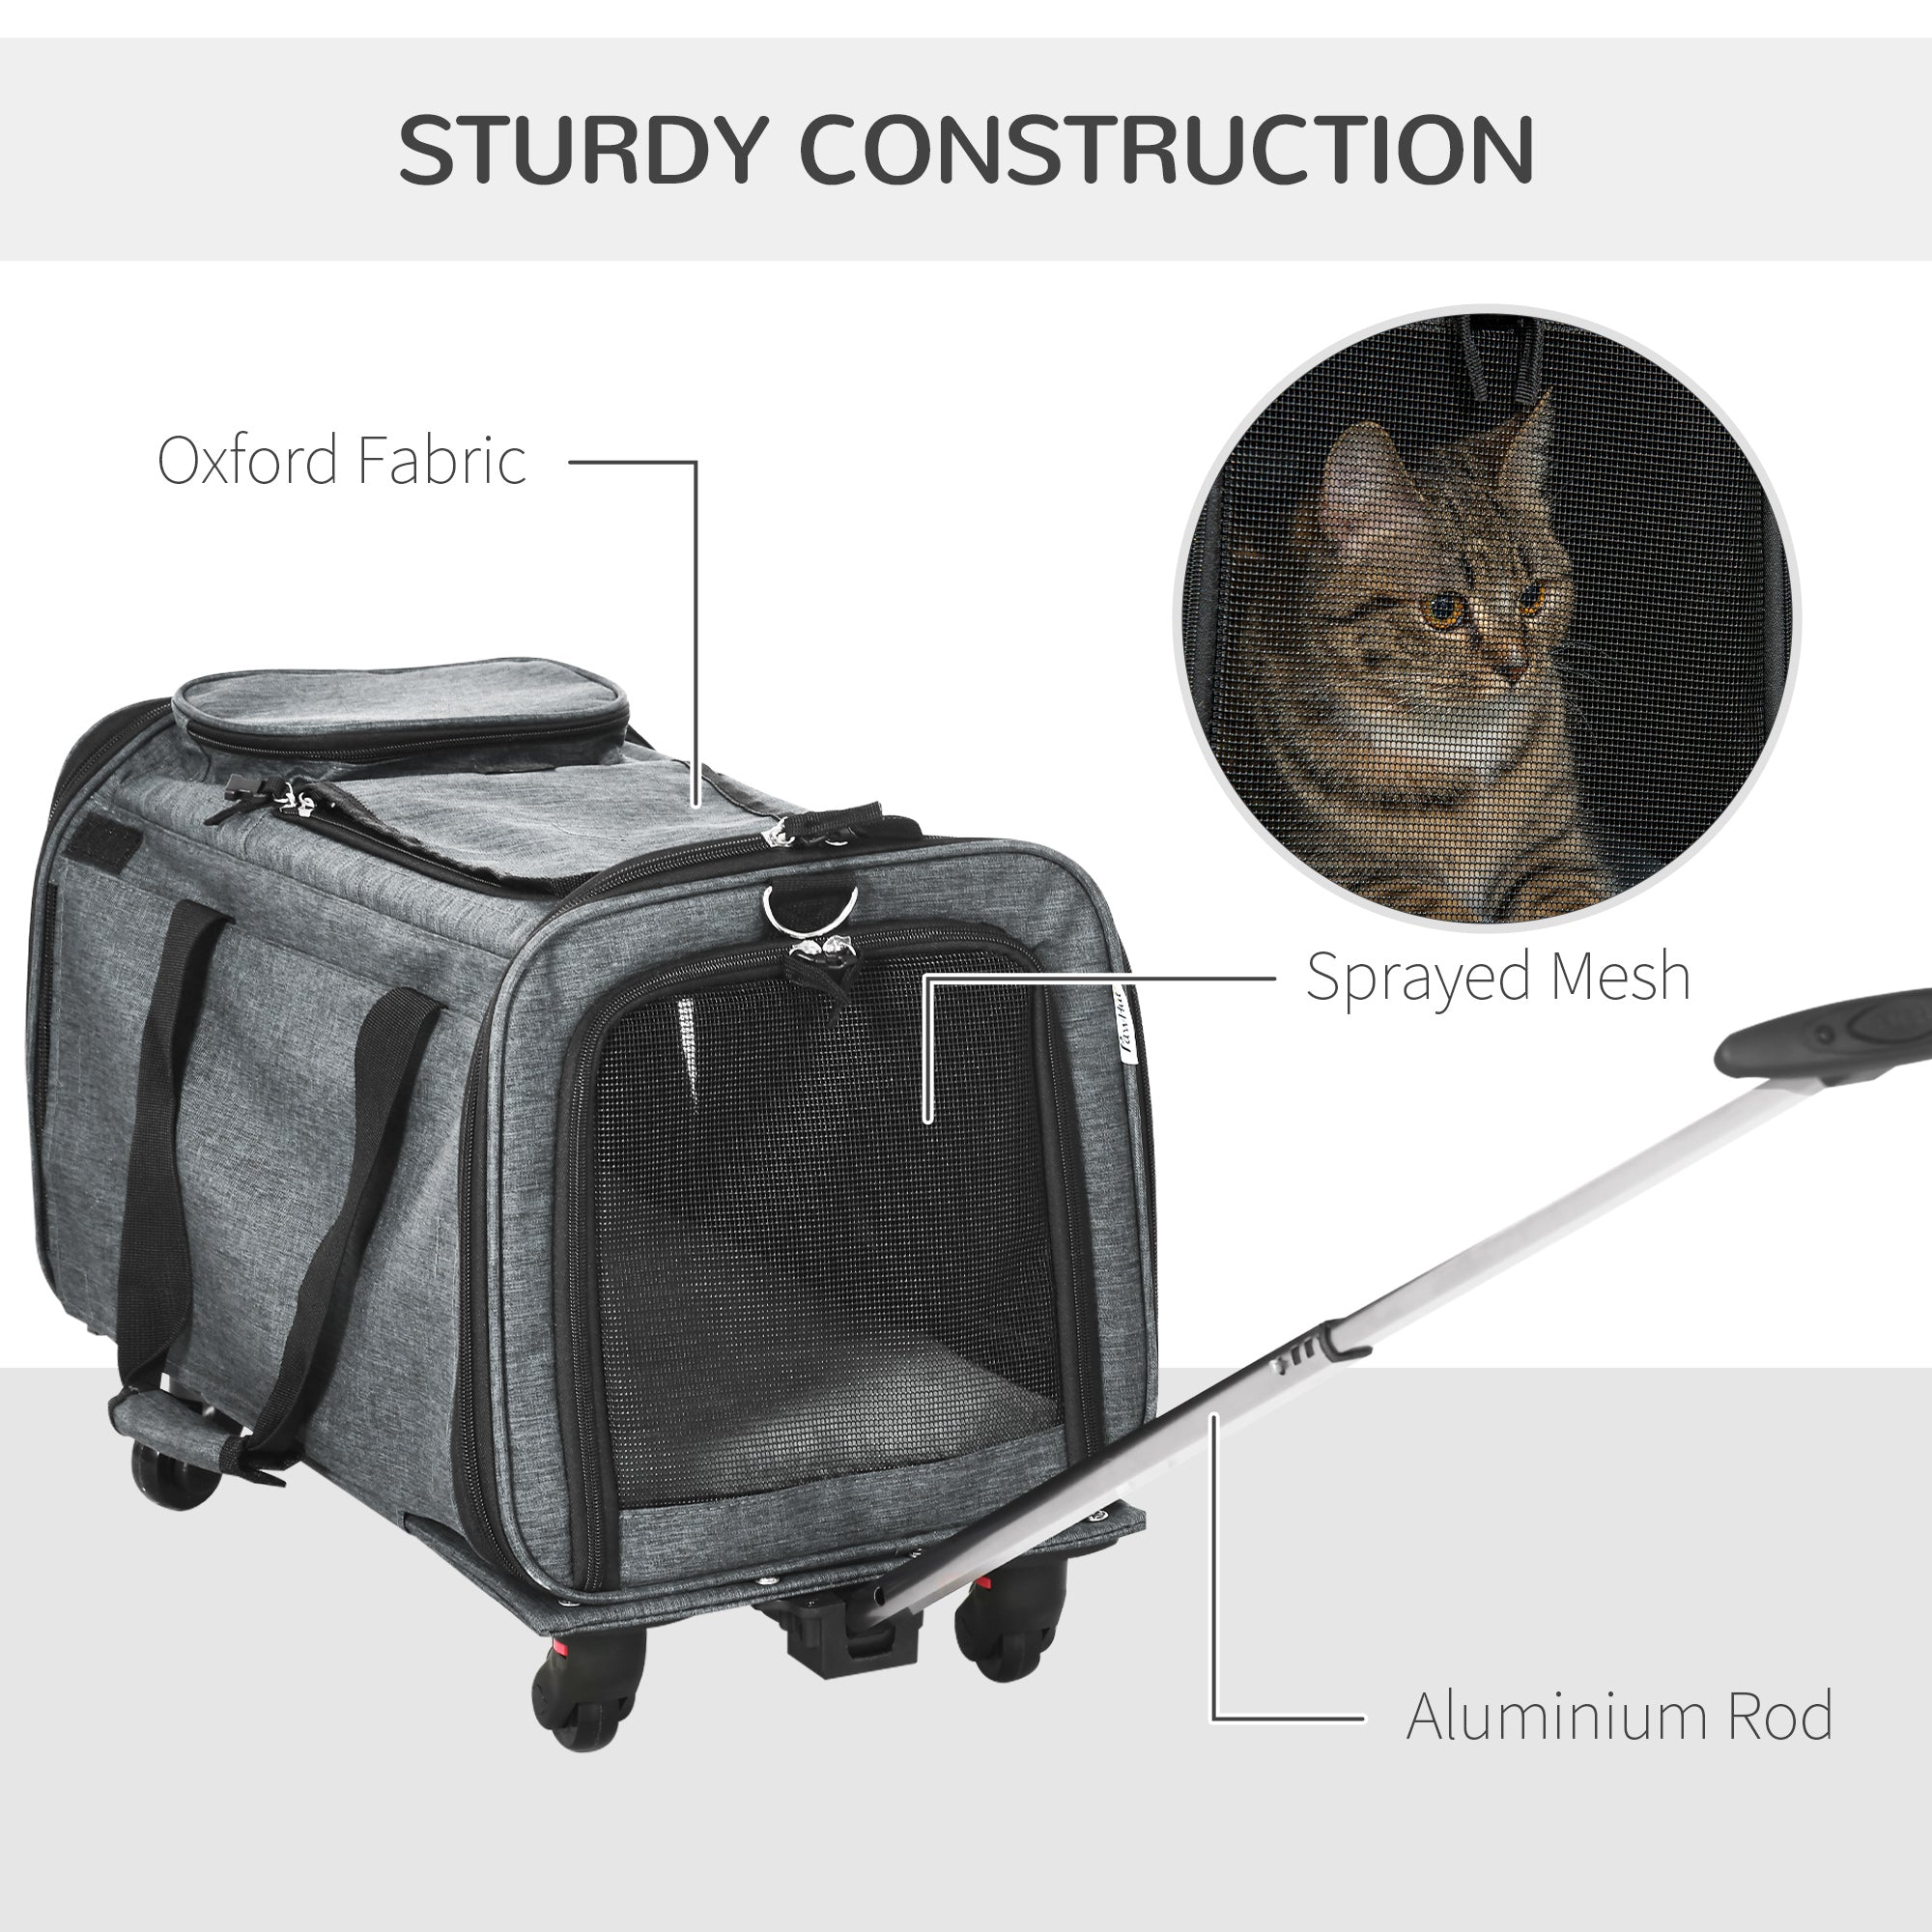 PawHut 4 in 1 Pet Carrier Portable Cat Carrier Foldable Dog Bag On Wheels for Cats, Miniature Dogs w/ Telescopic Handle, Grey